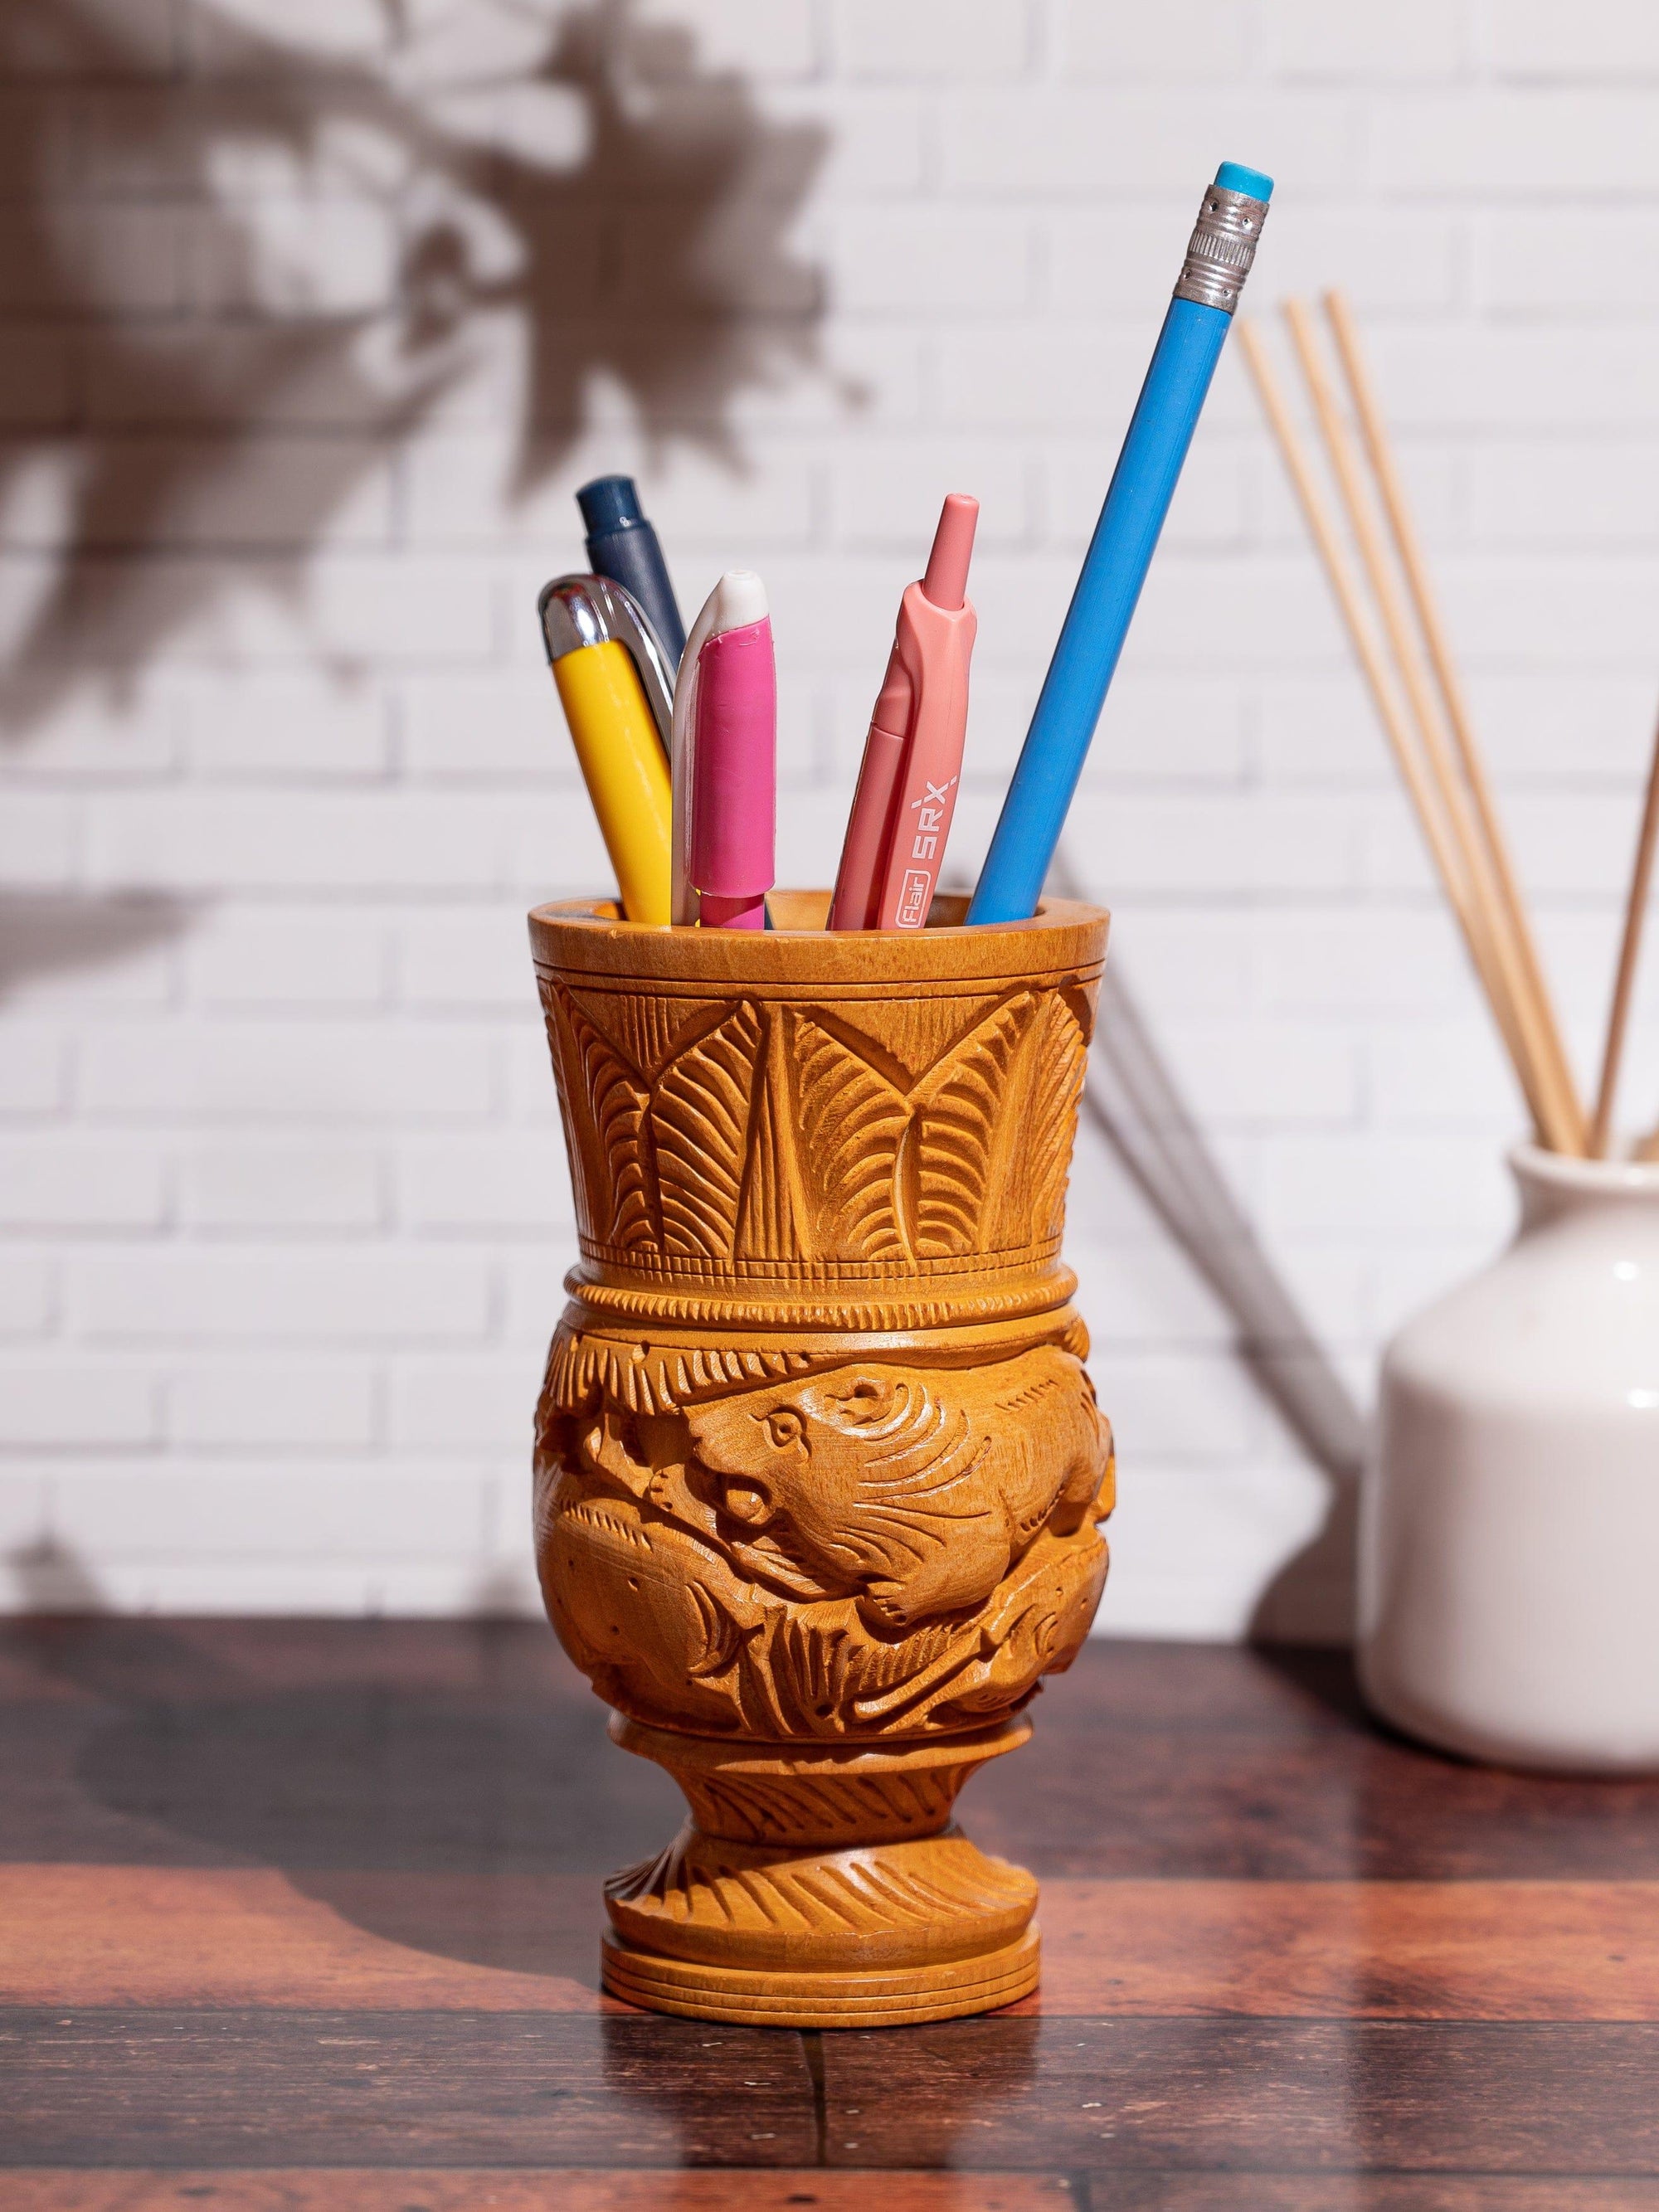 Hand carved Pen / Pencil holder made of Kadam wood - 5 inches height - The Heritage Artifacts